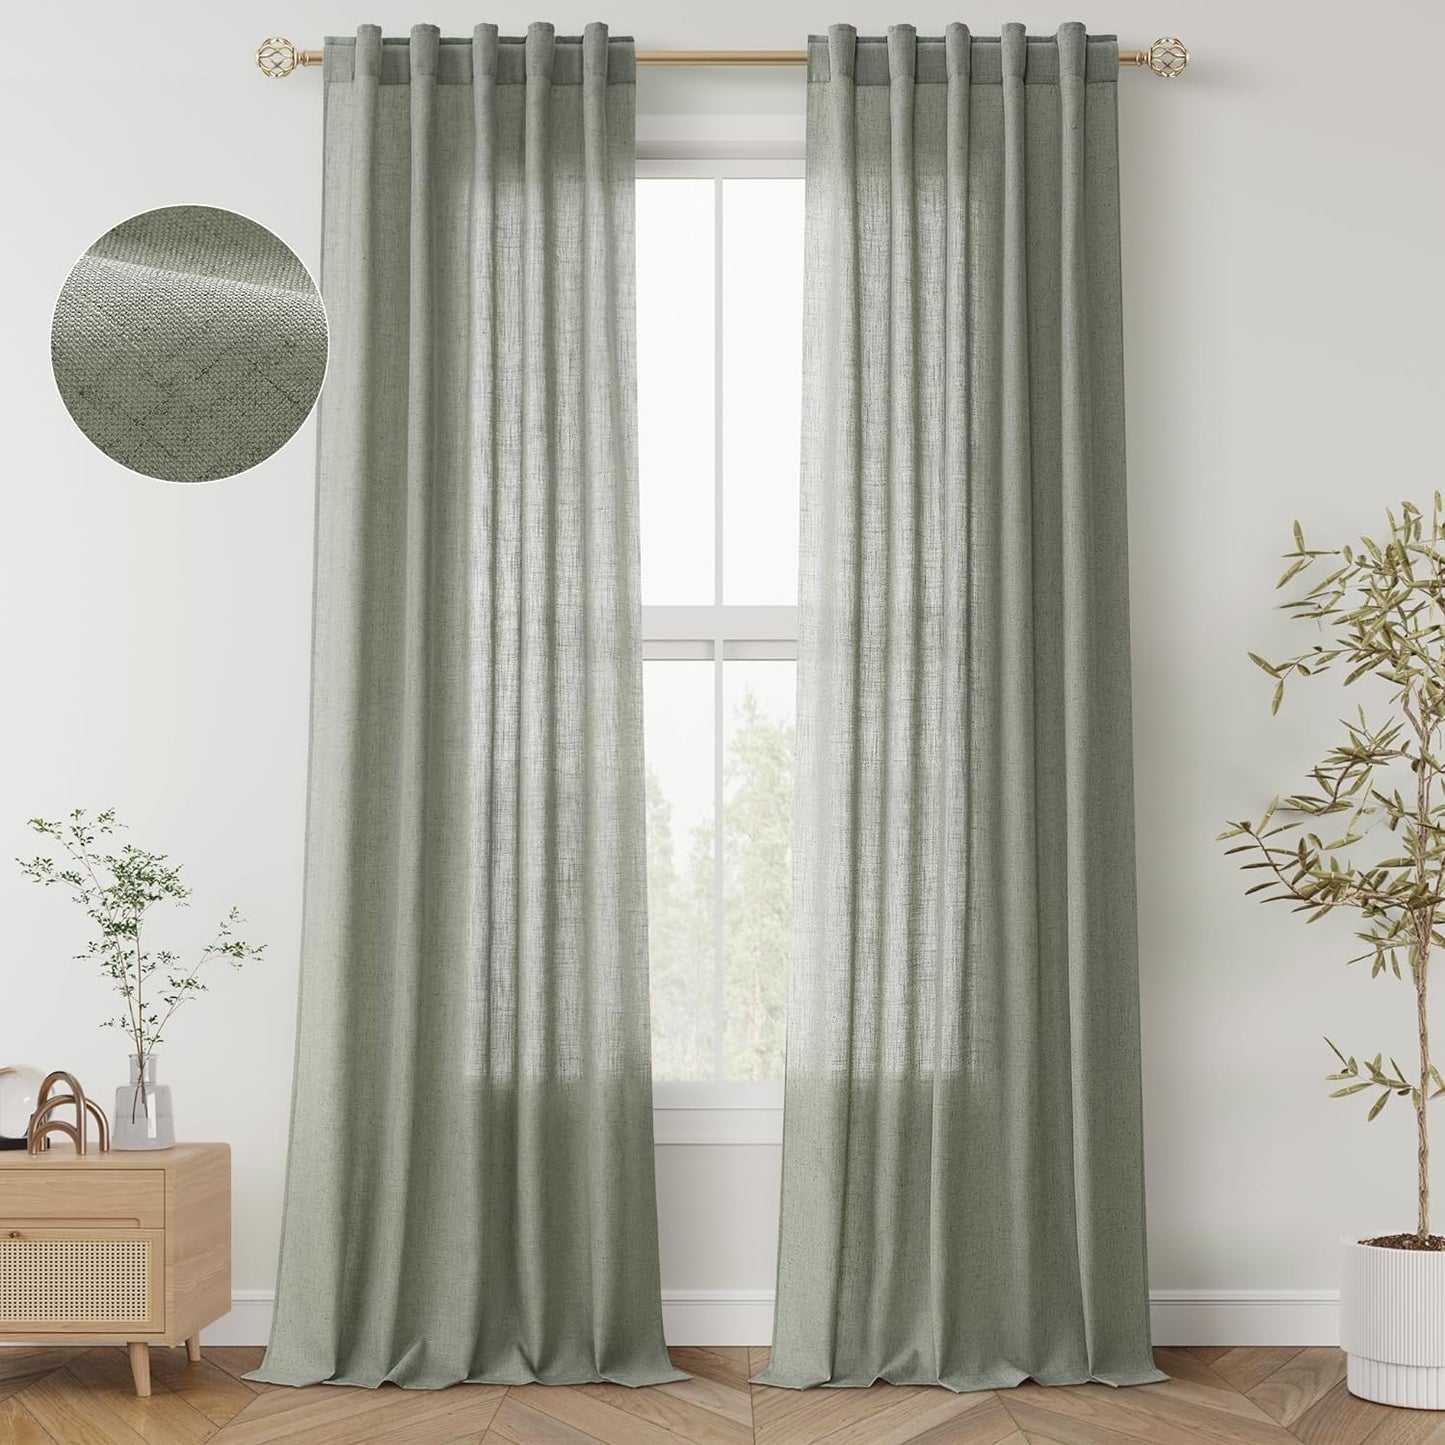 Natural Linen Sheer Curtains 84 Inch Long for Living Room Bedroom Back Tab Light Filtering Privacy Farmhouse Rod Pocket Ivory off White Neutral Drapes with Hooks 2 Panels Cream Beige  SPWIY Sage Green 40W X 108L Inch X 2 Panels 